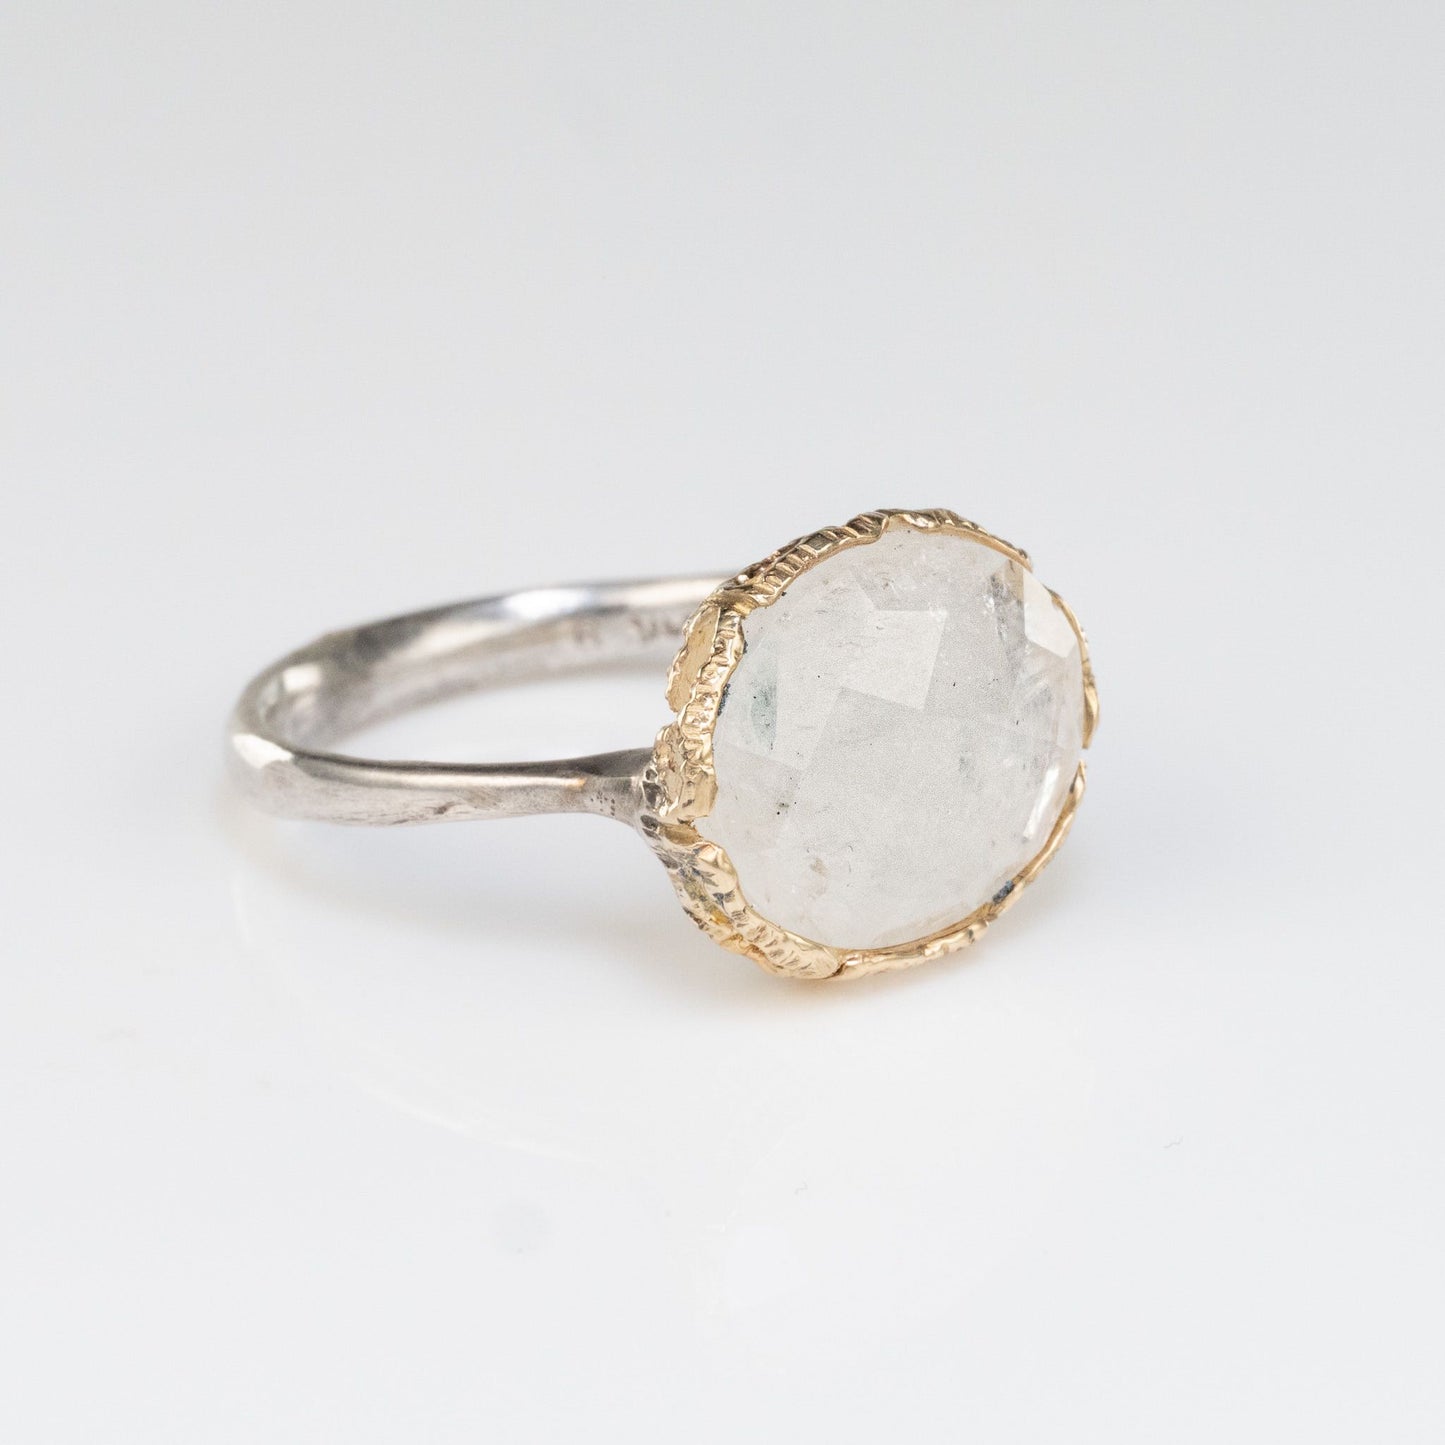 Danielle Welmond 14K and Sterling Silver Oval Moonstone Ring